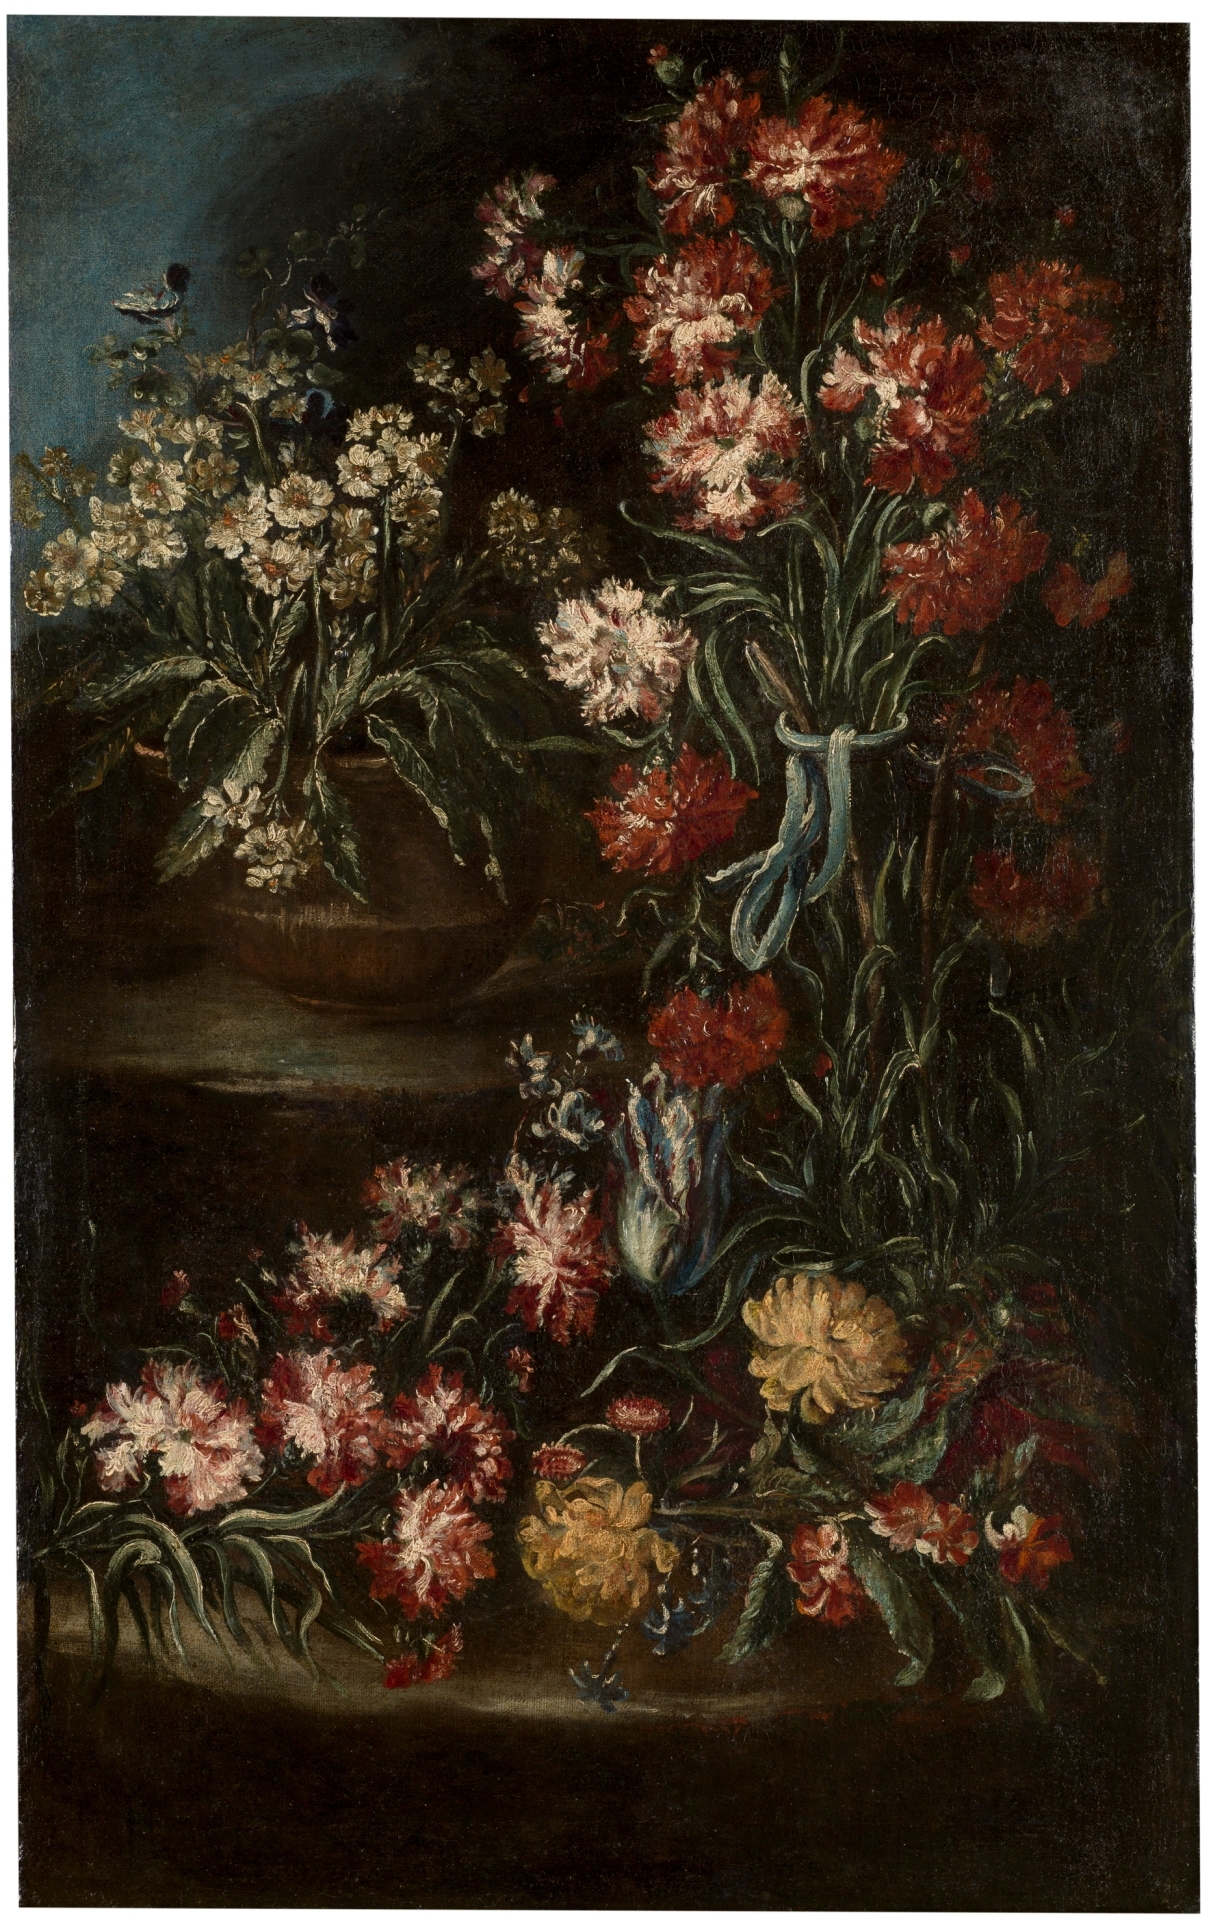 A floral still life with pots of flower on two levels, filling the vertical canvas. The flowers are mostly pink, white, and red, with some yellow and a blue ribbon accenting one of the bouquets.